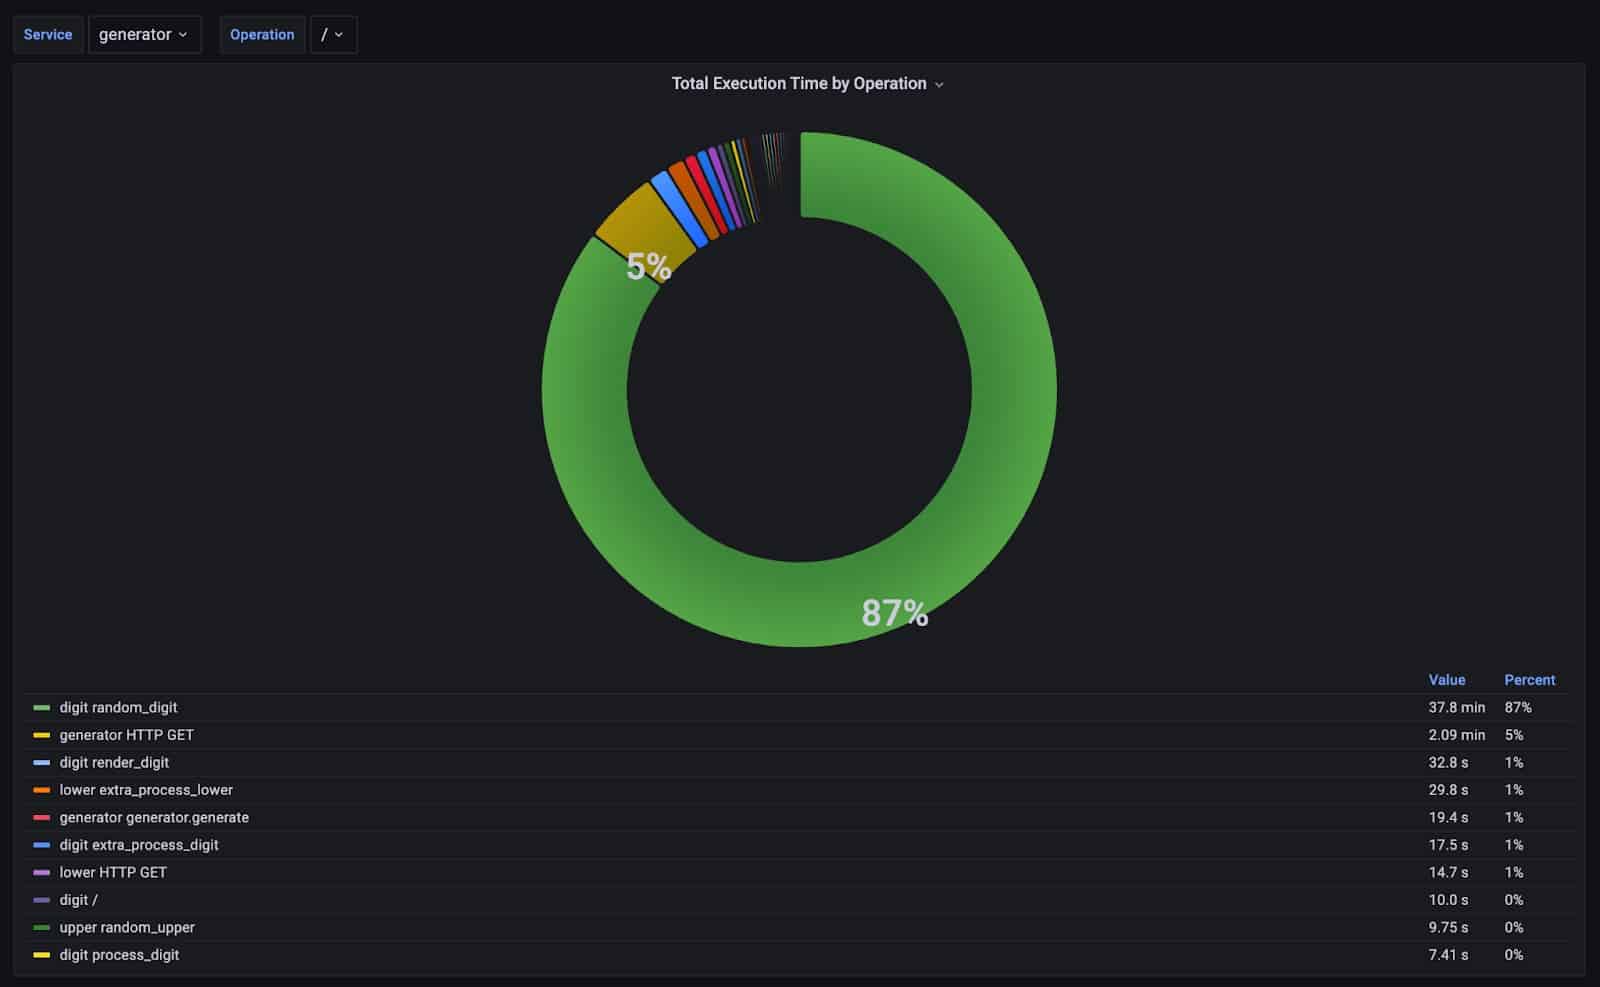 Graph showing the operations with the highest execution time in Grafana.